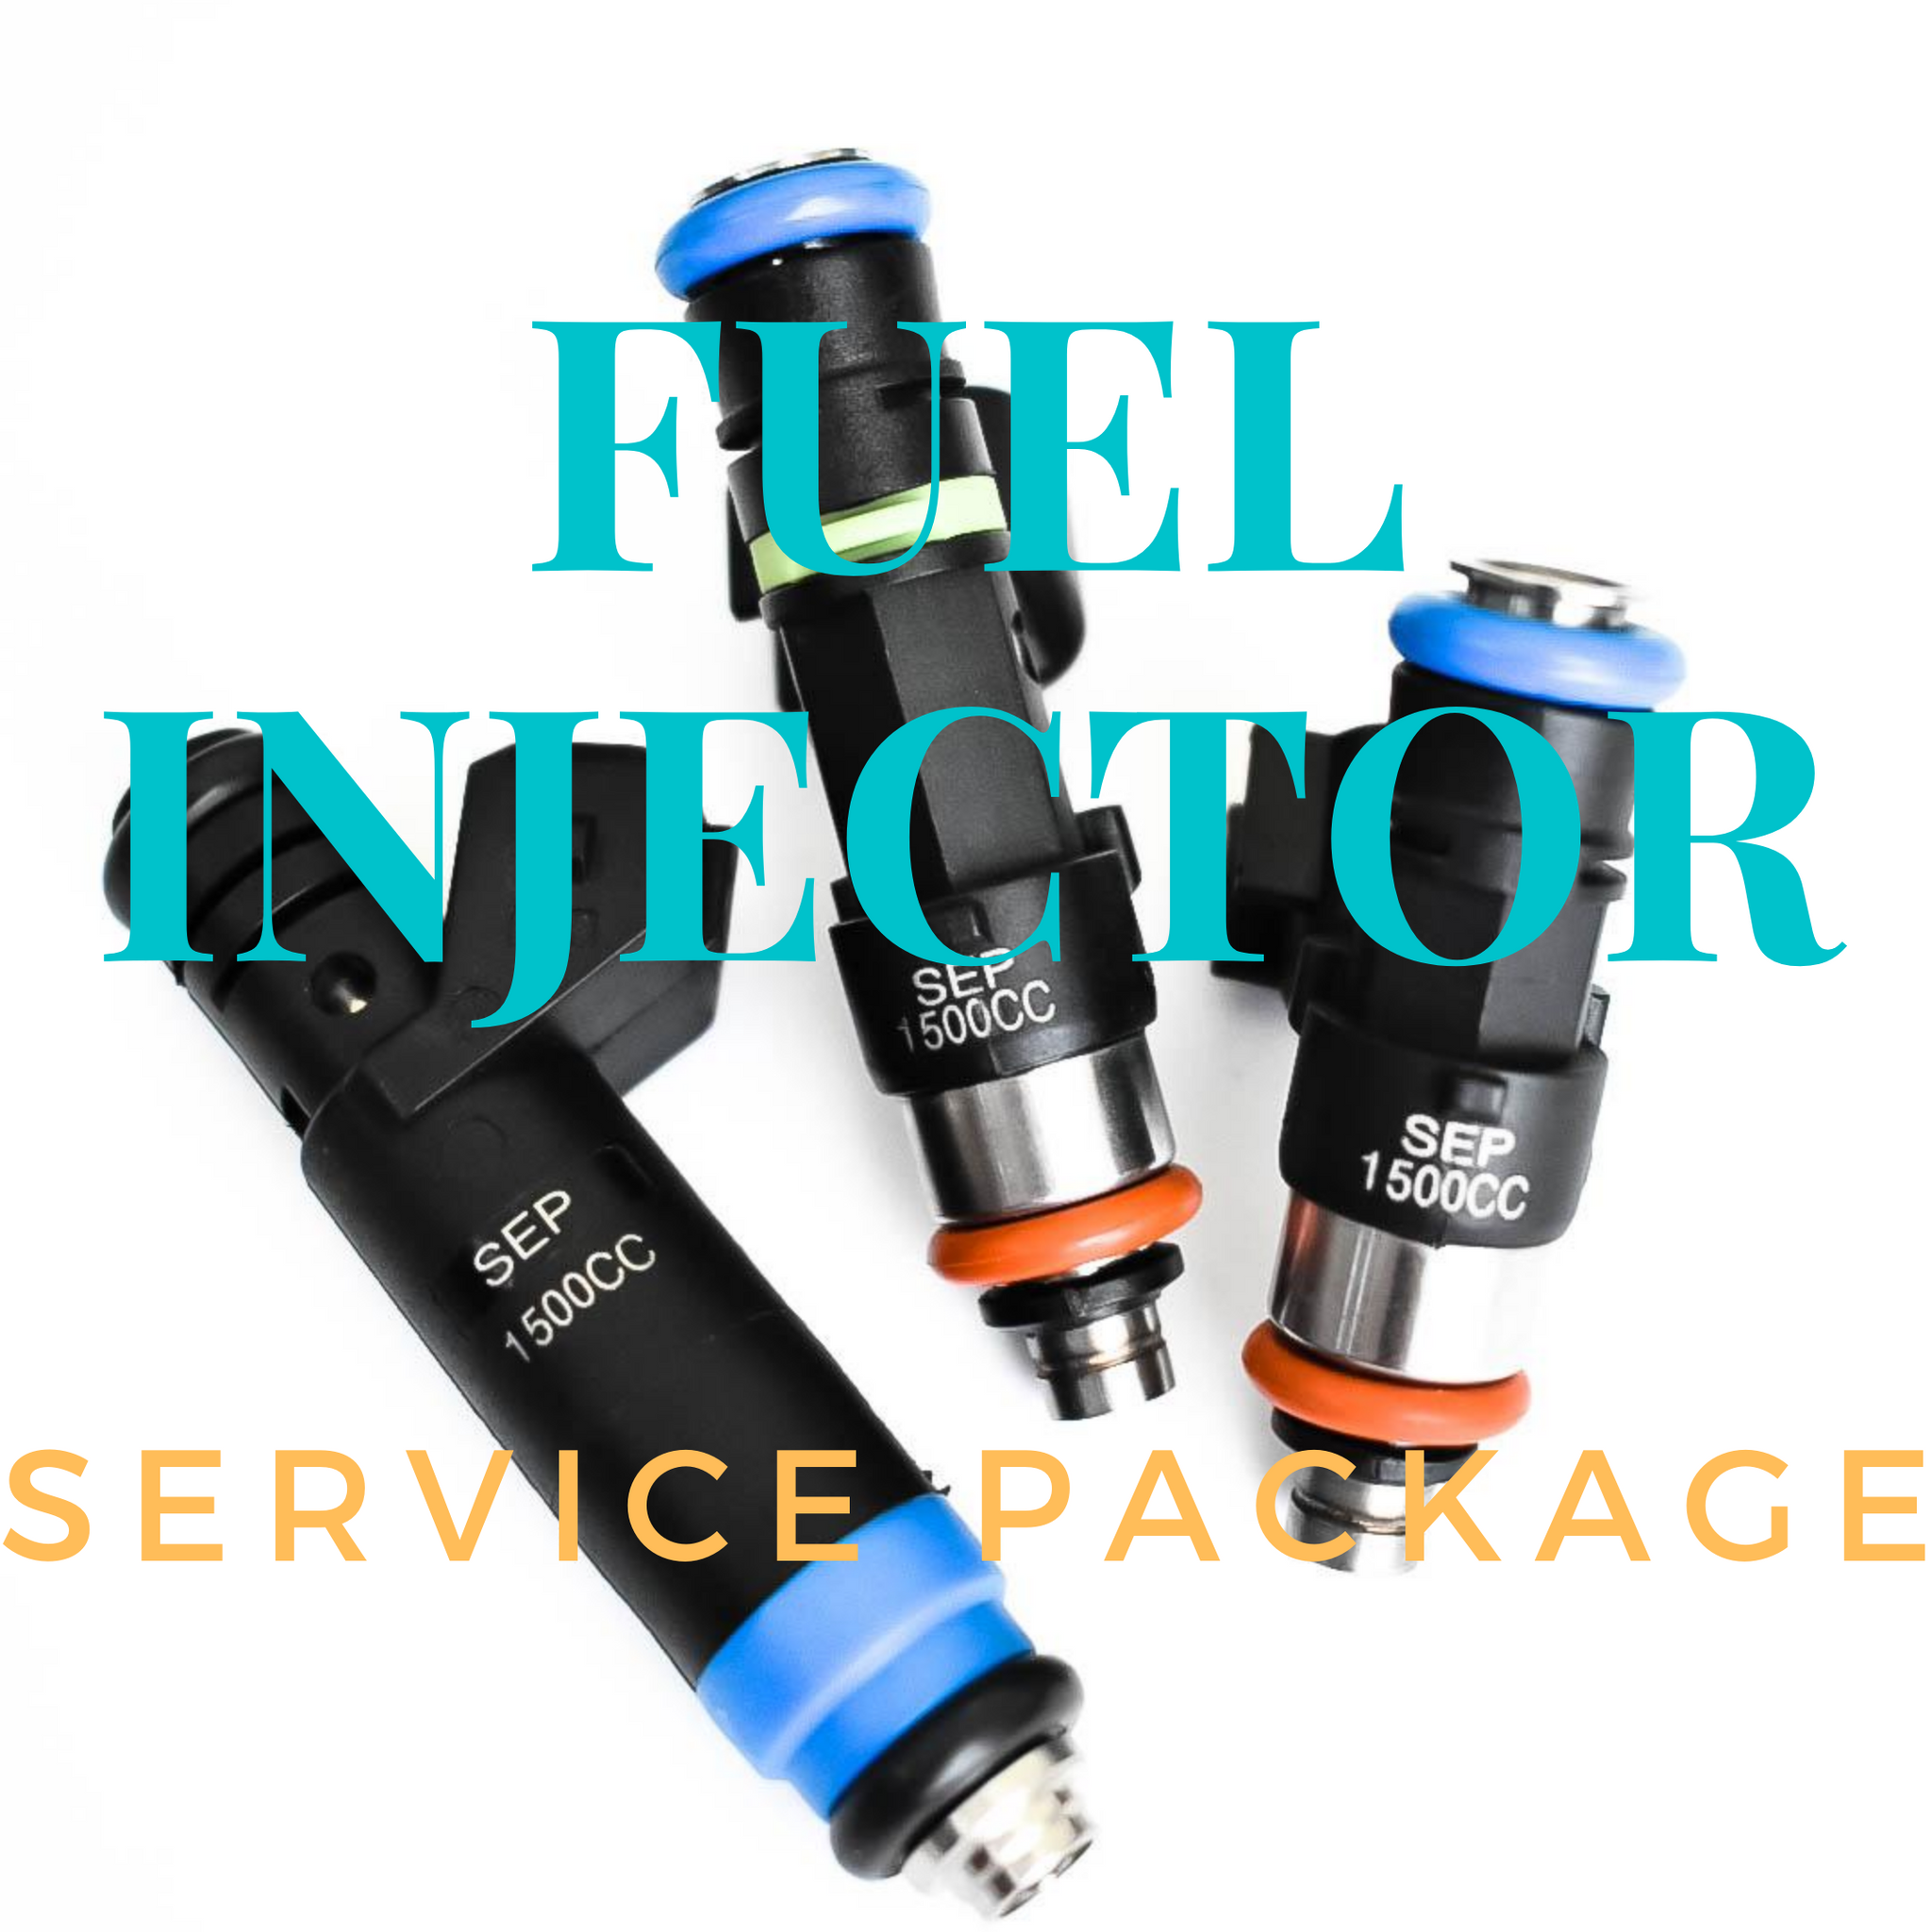 Injector Service/Flow Testing